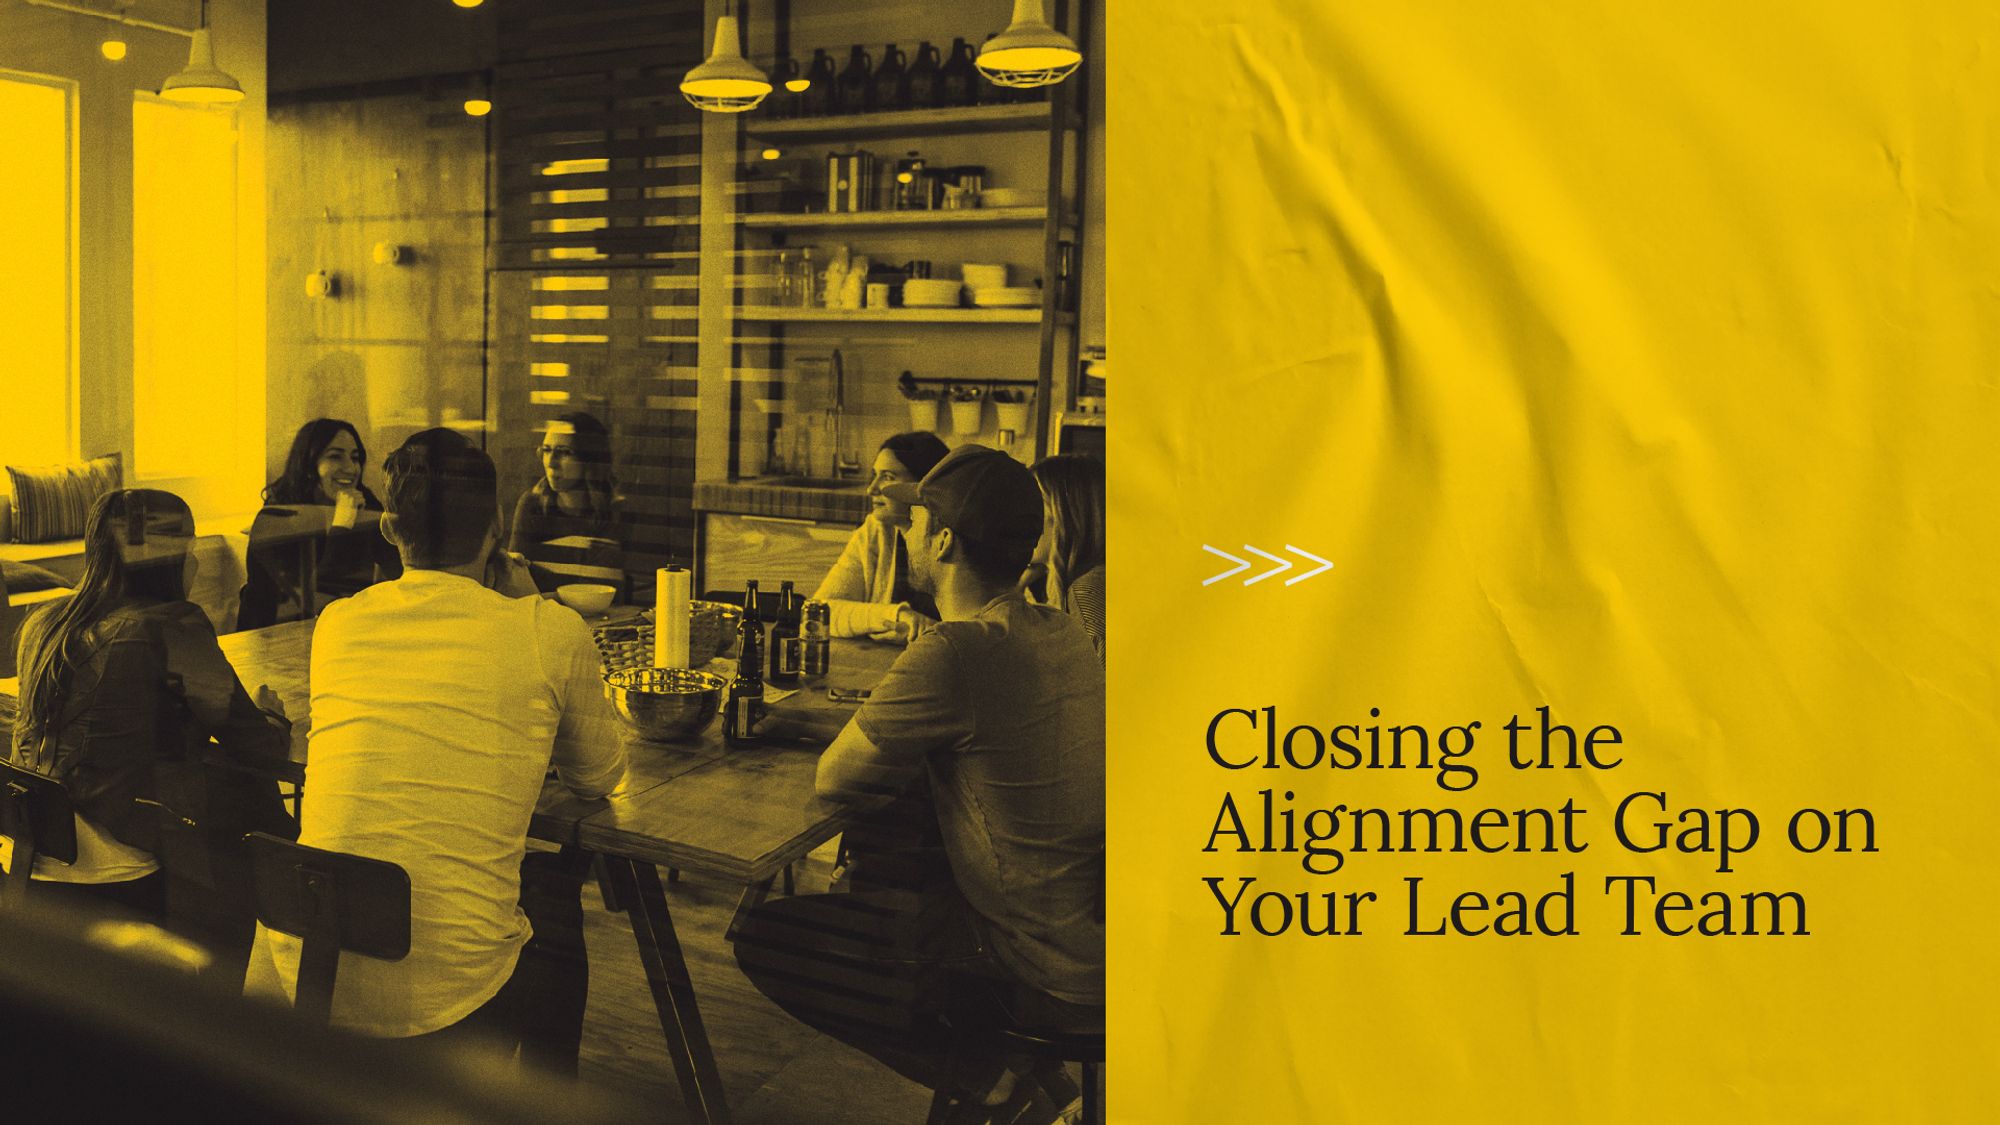 Closing the Alignment Gap on Your Lead Team